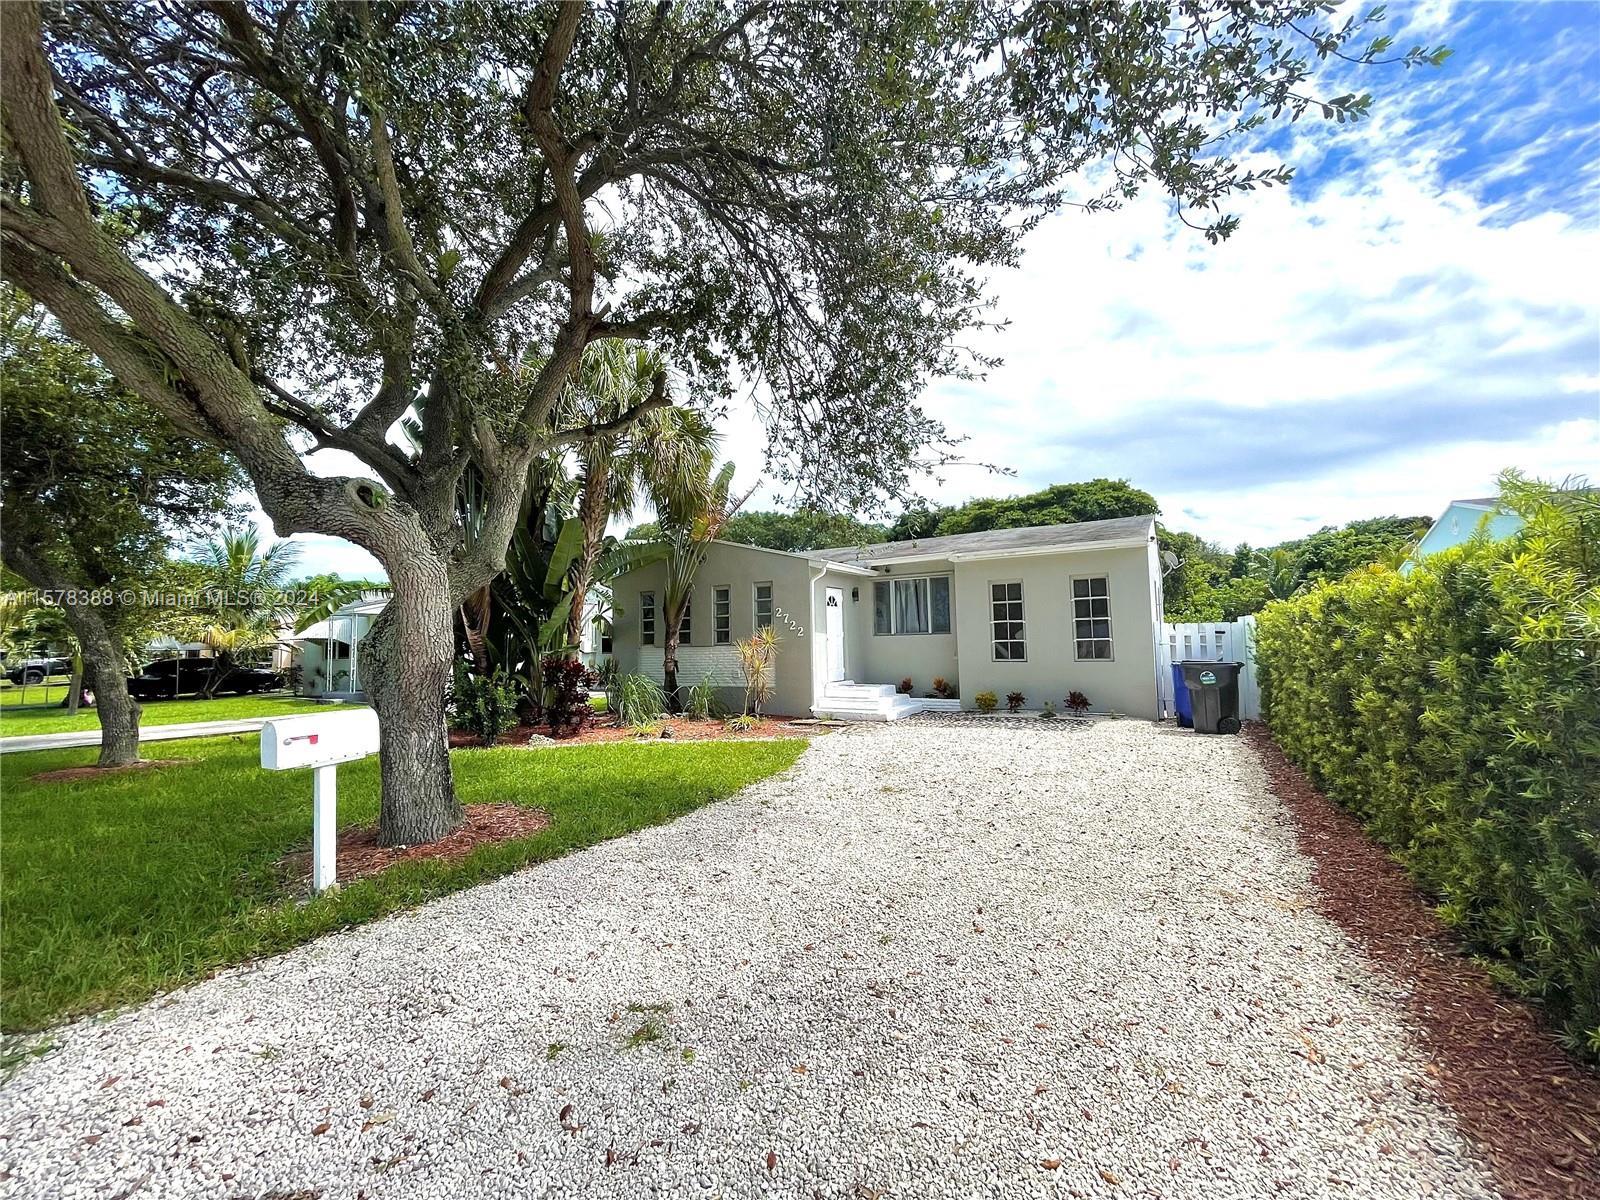 Photo of 2722 Taylor St in Hollywood, FL